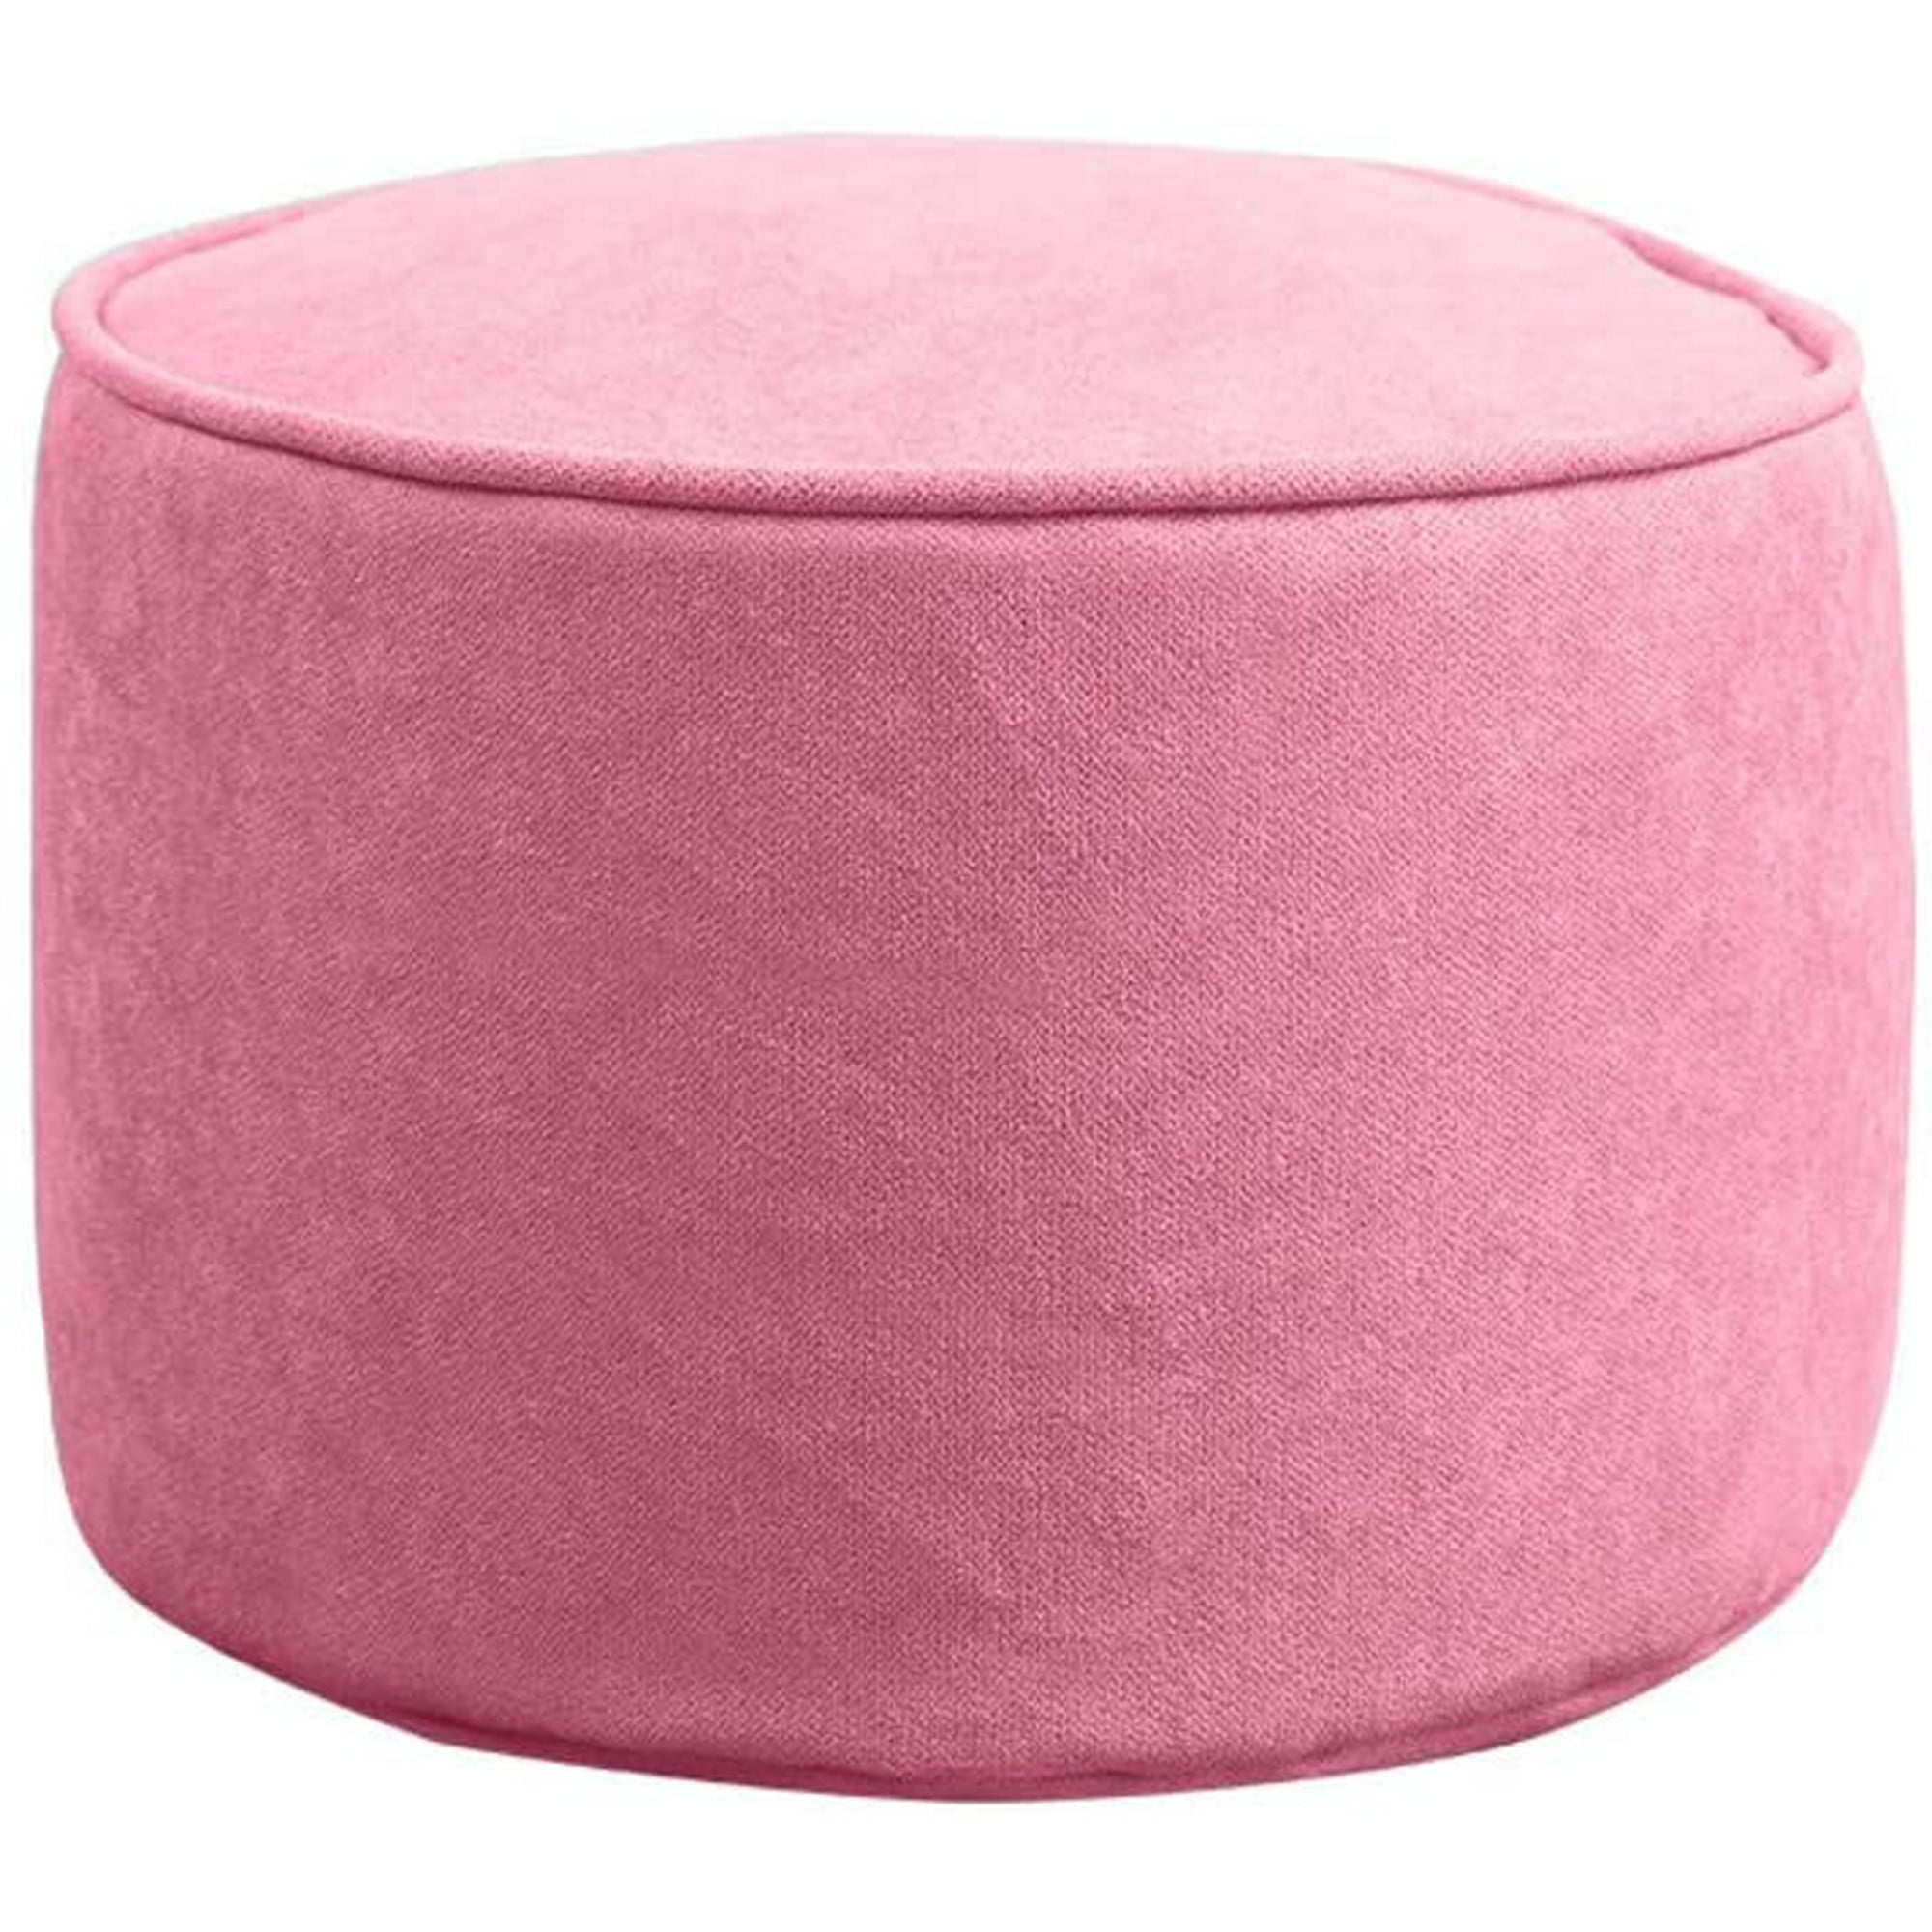 16x16x12inch WT&WT Round Solid Color Pouf,Breathable Removable Washable Comfort Soft Foot Stools Ottomans for Living Room Small Space-Dark Gray 40x40x30cm